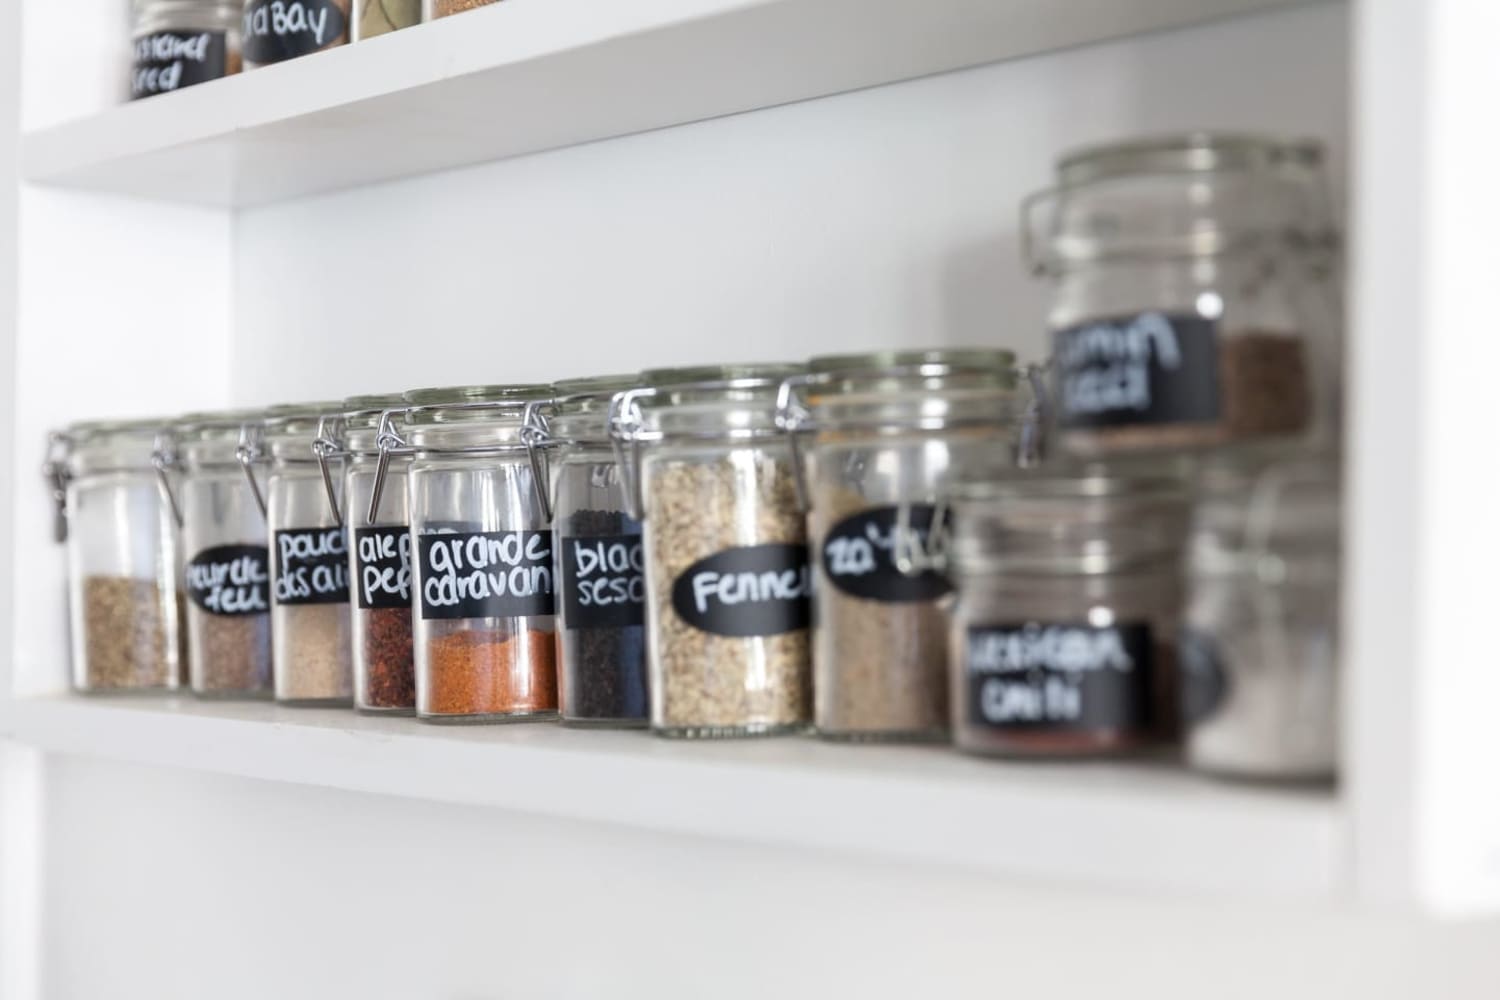 Spice storage solution  Organize spices using cheap Ikea spice